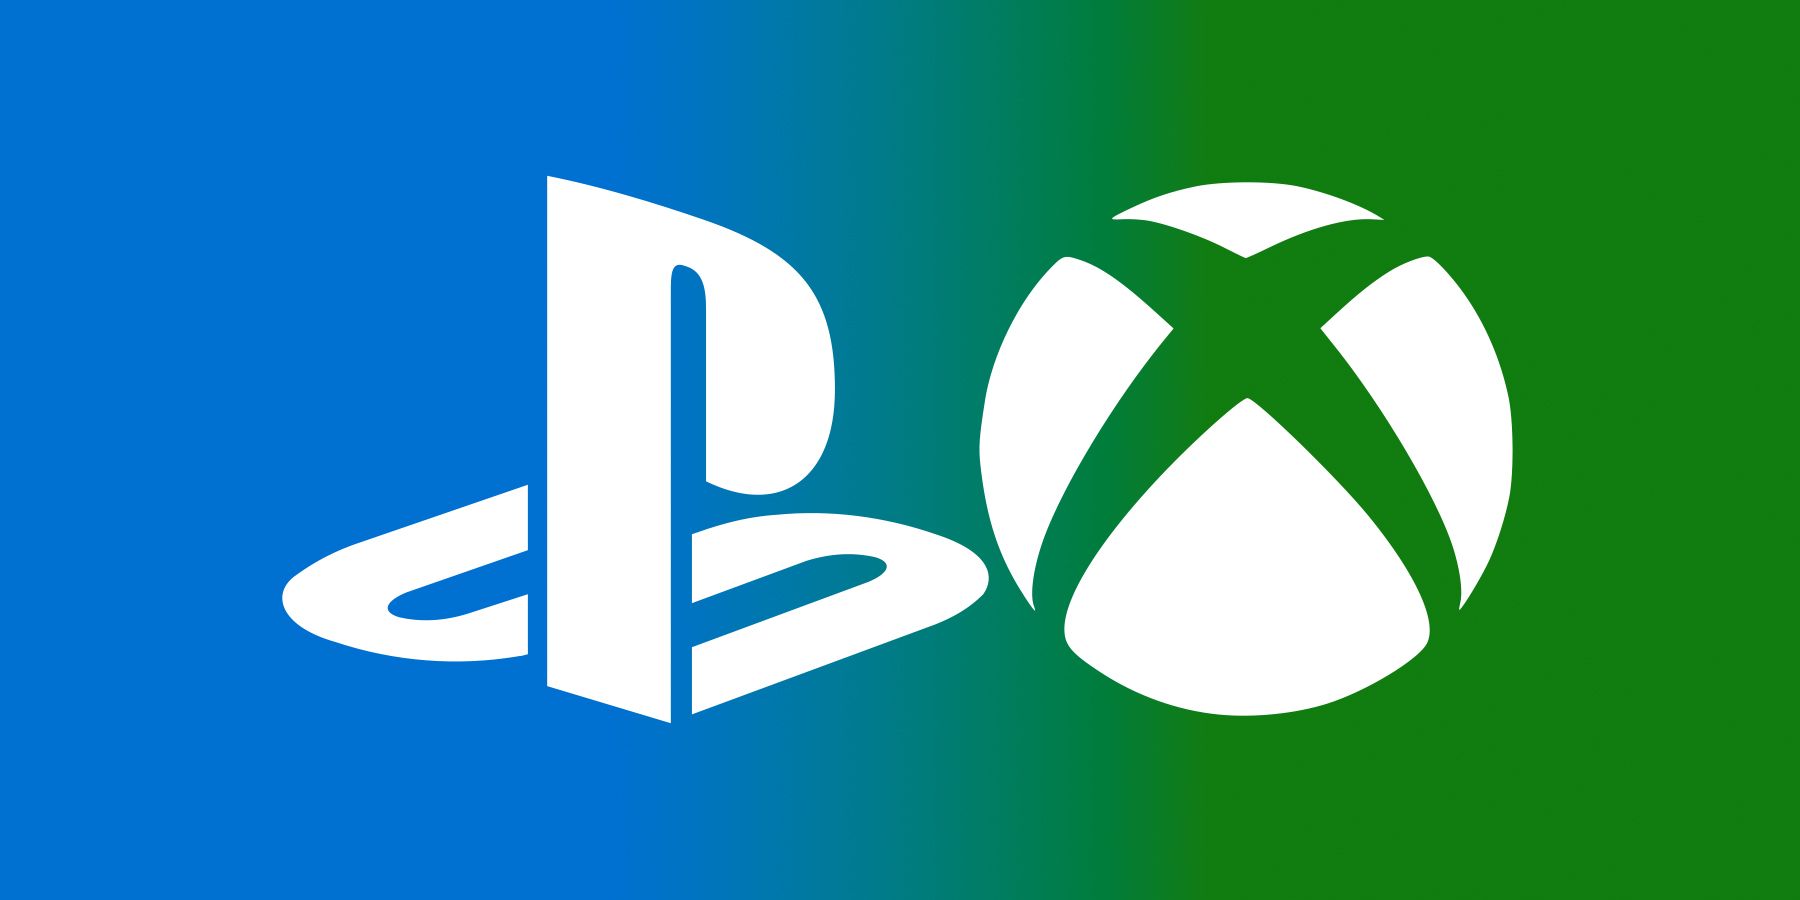 PlayStation and Xbox logo submarks on blue-green gradient background